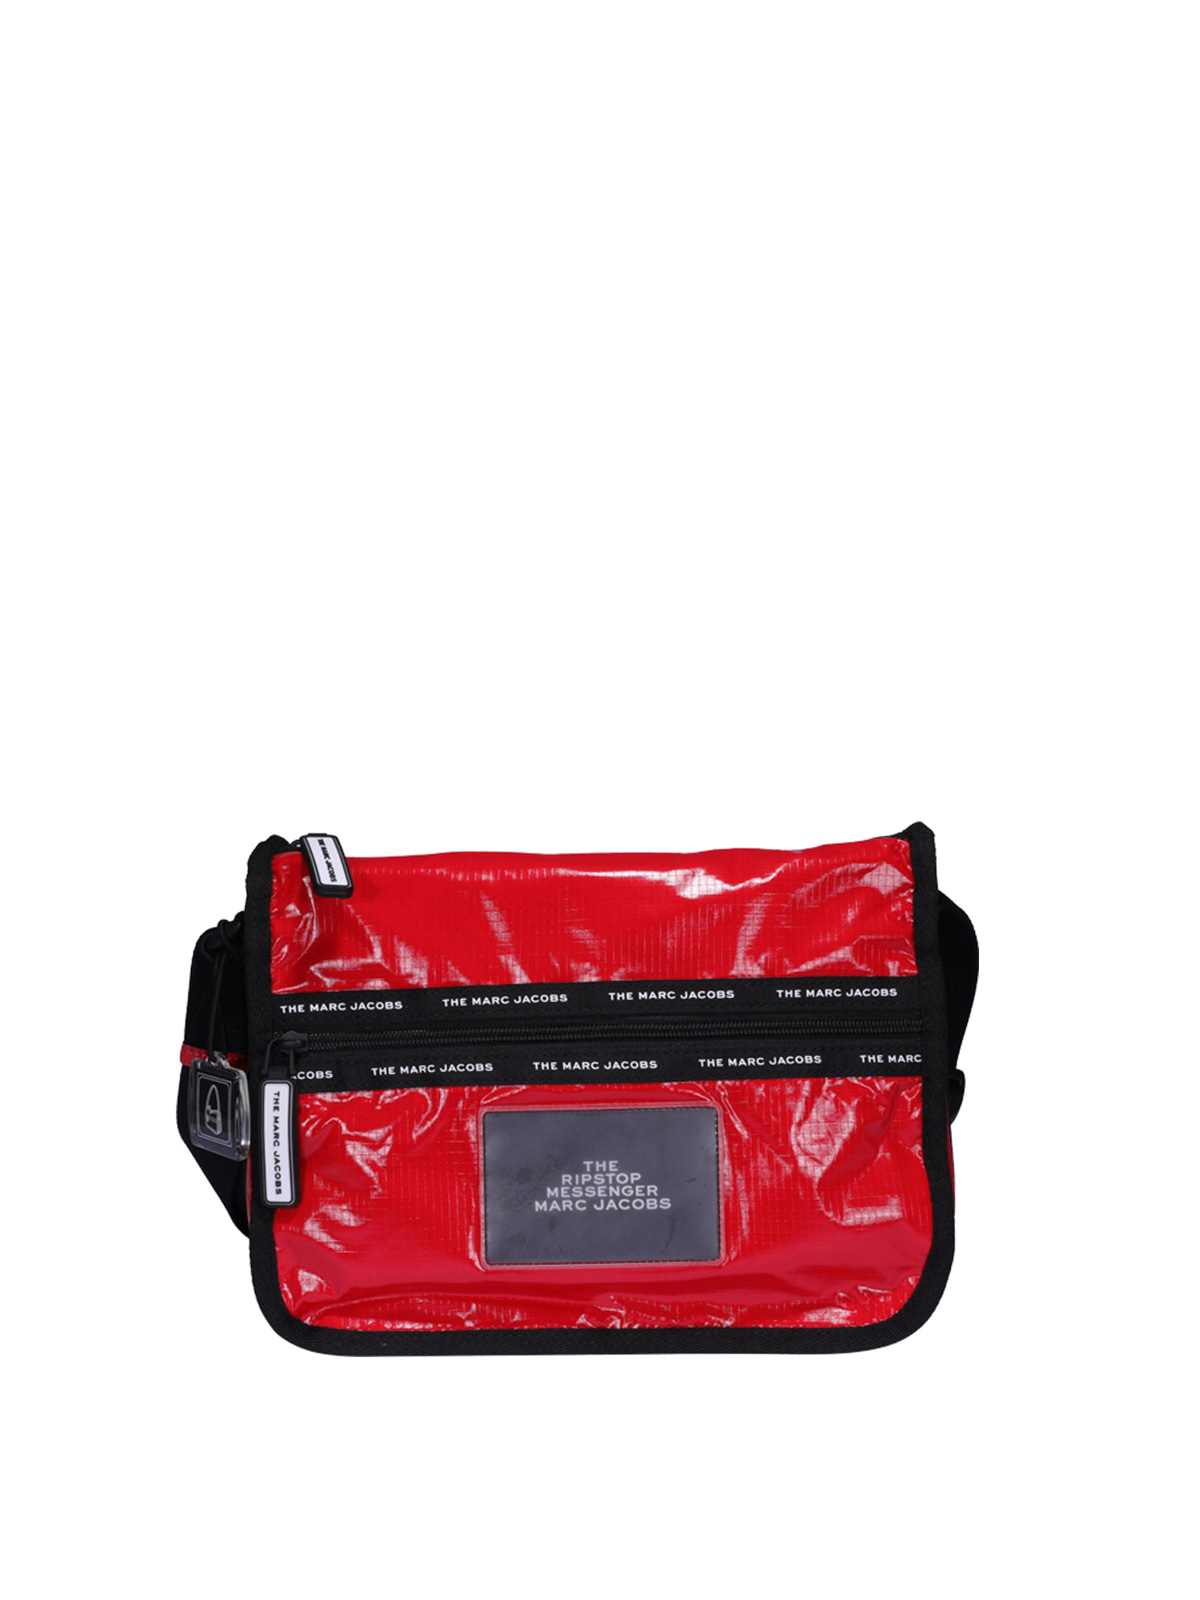 MARC JACOBS THE RIPSTOP RED NYLON MESSENGER BAG